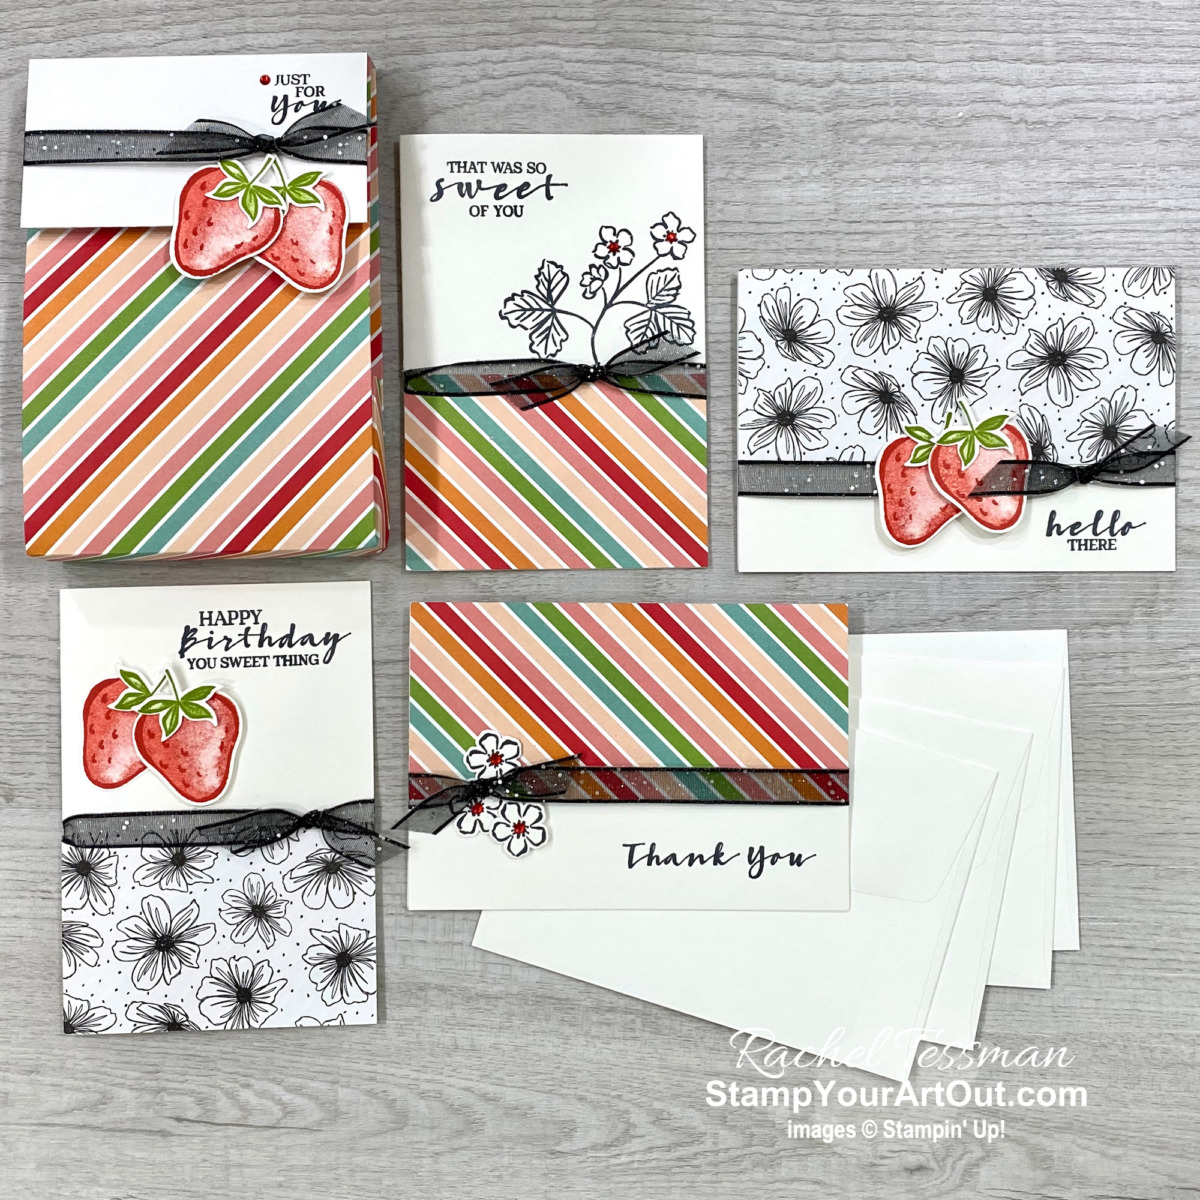 Click here to see the note card set and pouch that I made with the Strawberry Builder Punch, coordinating Sweet Strawberry Stamp Set, and a sheet of Pattern Party Designer Paper. - Stampin’ Up!® - Stamp Your Art Out! www.stampyourartout.com